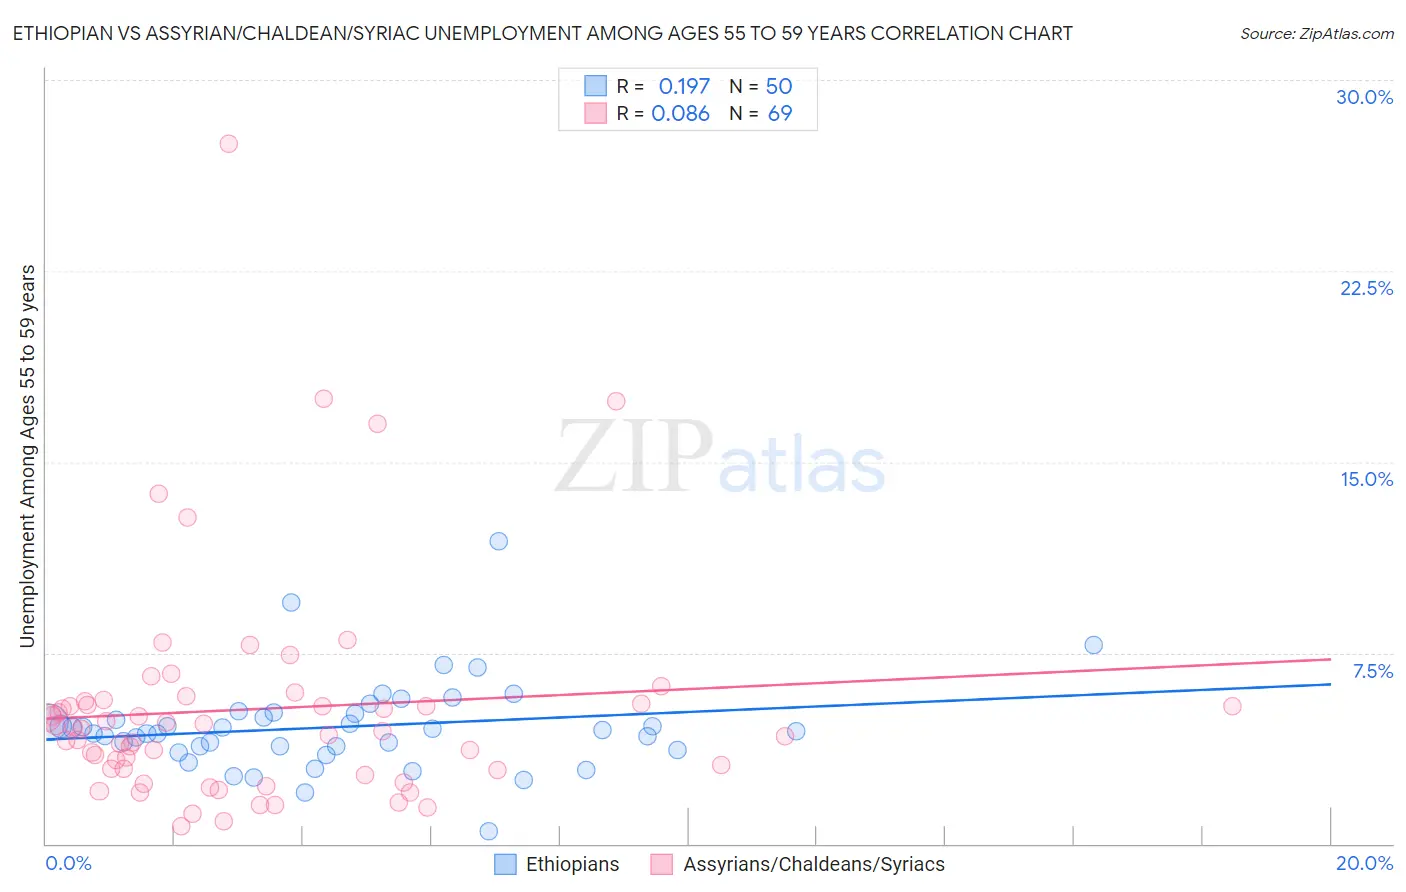 Ethiopian vs Assyrian/Chaldean/Syriac Unemployment Among Ages 55 to 59 years